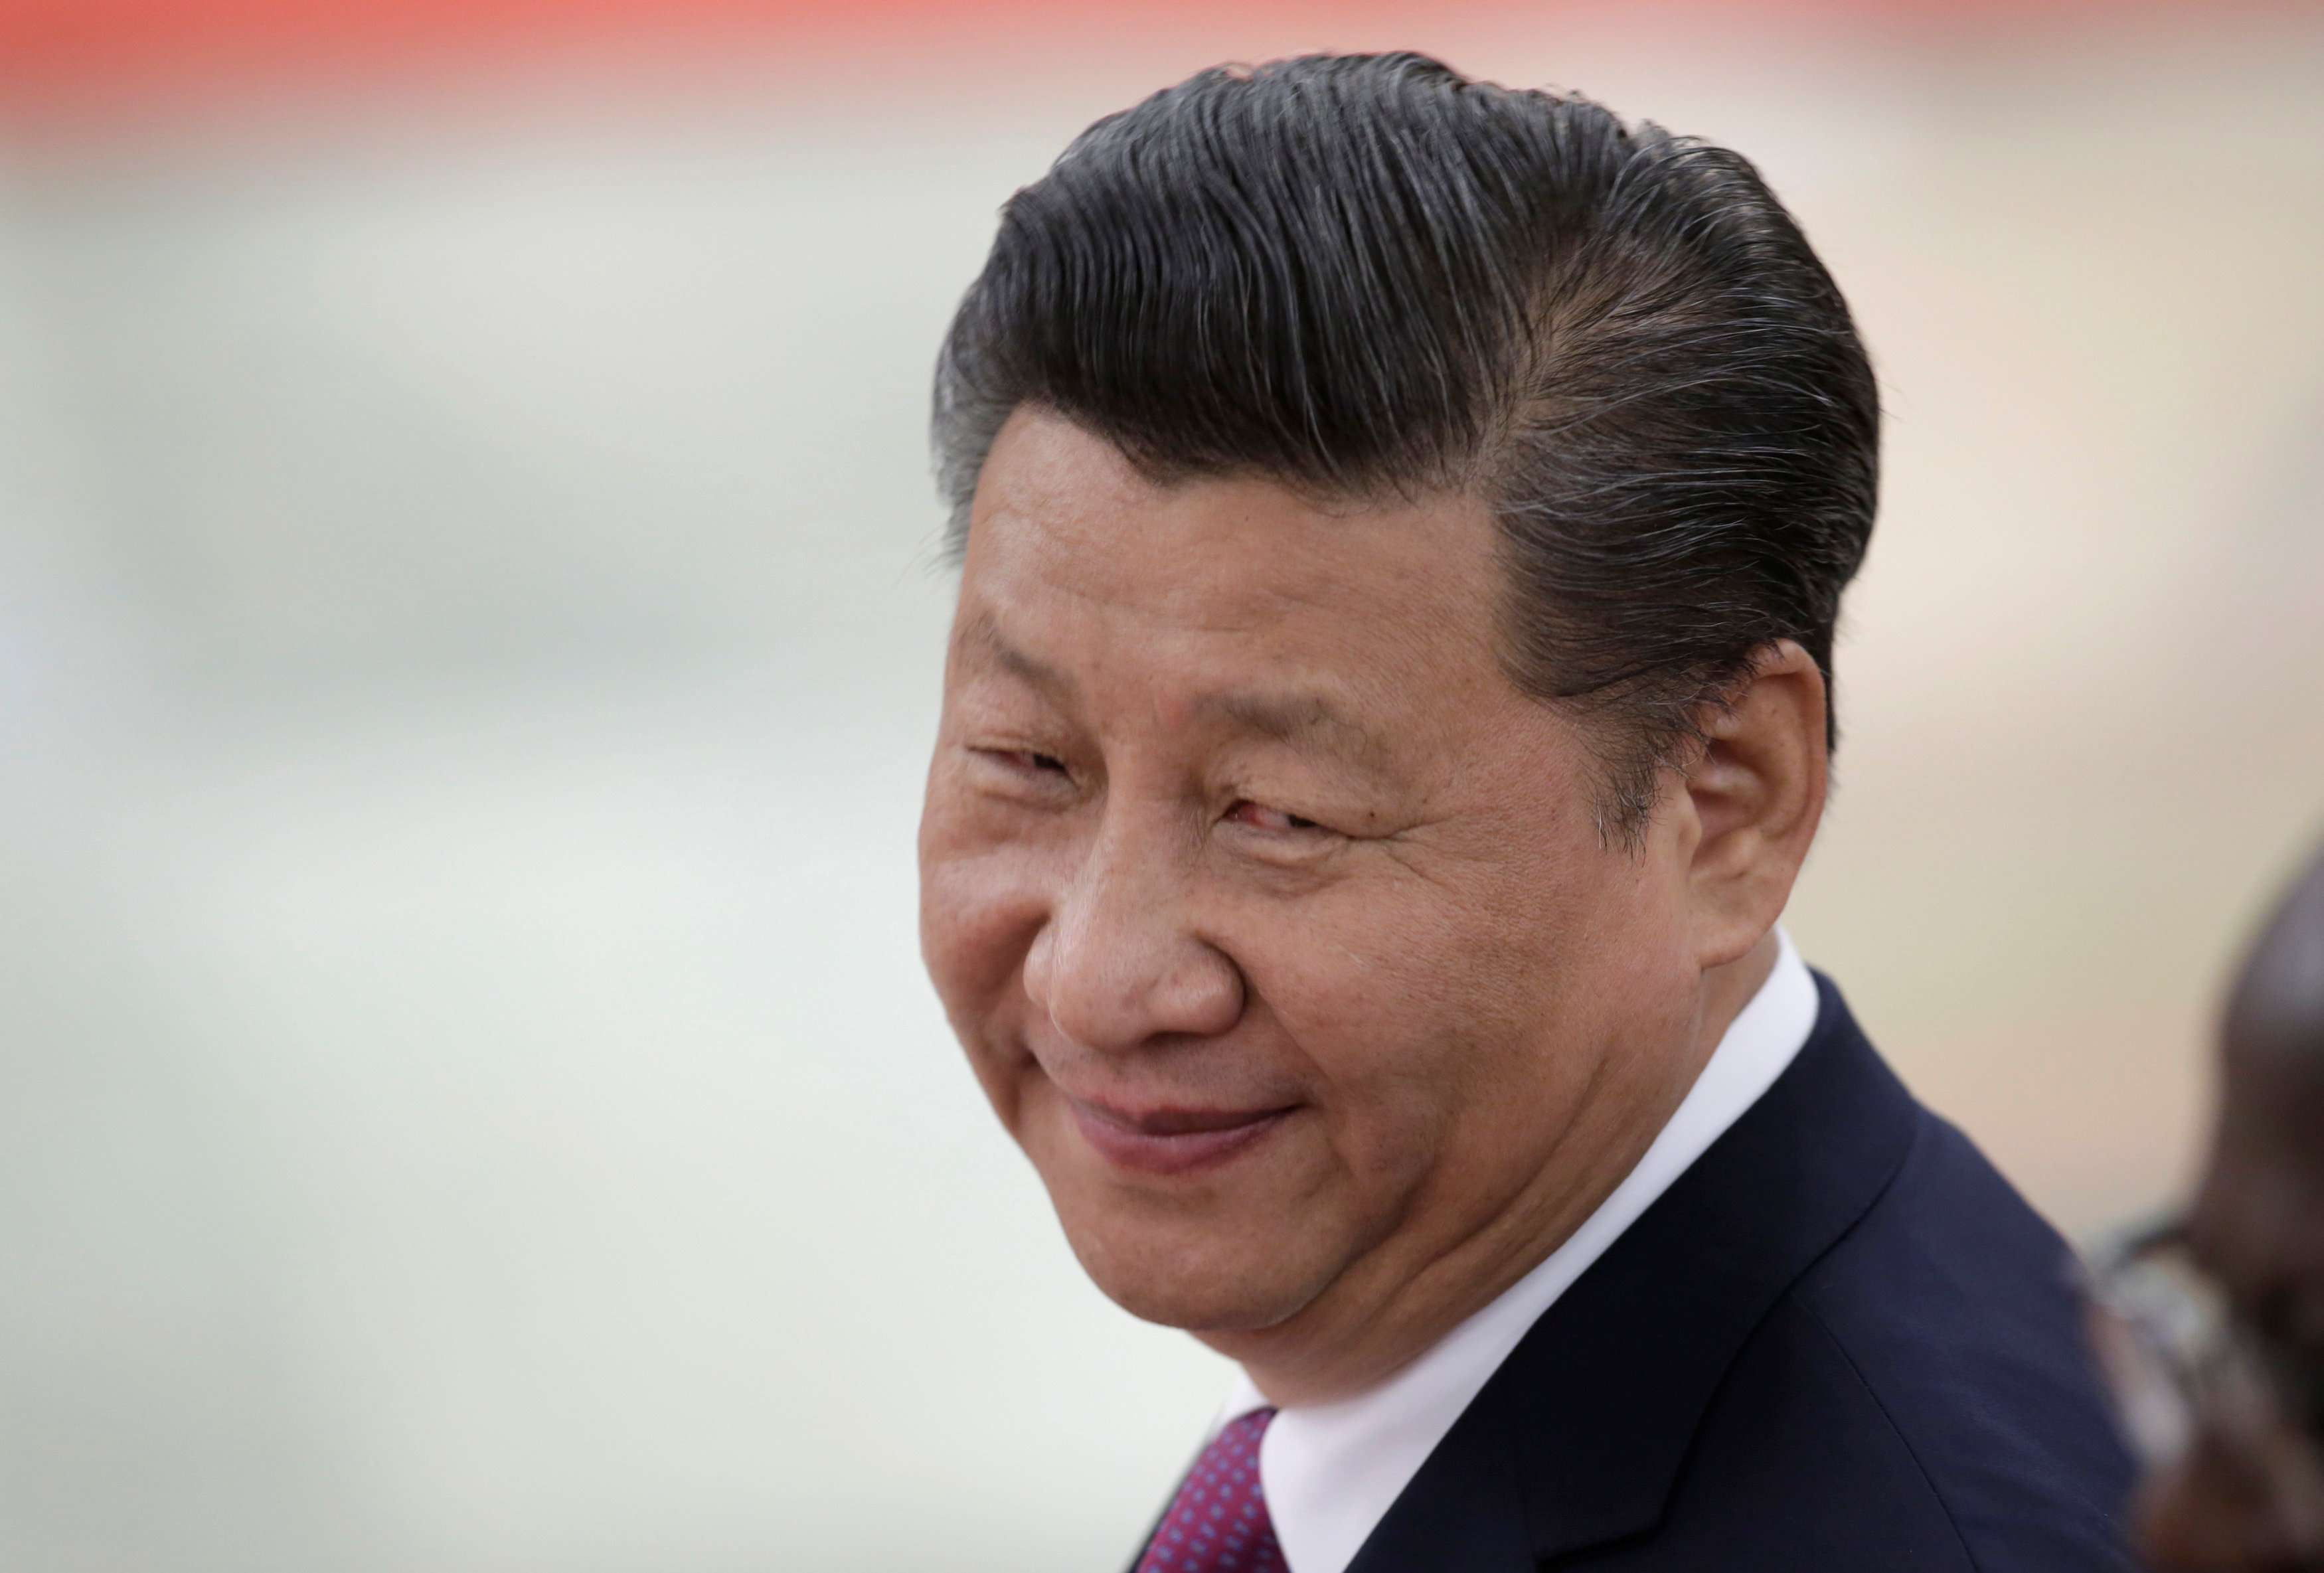 China’s President Xi Jinping might attend the gathering in Switzerland in January, according to the Financial Times. Photo: Reuters